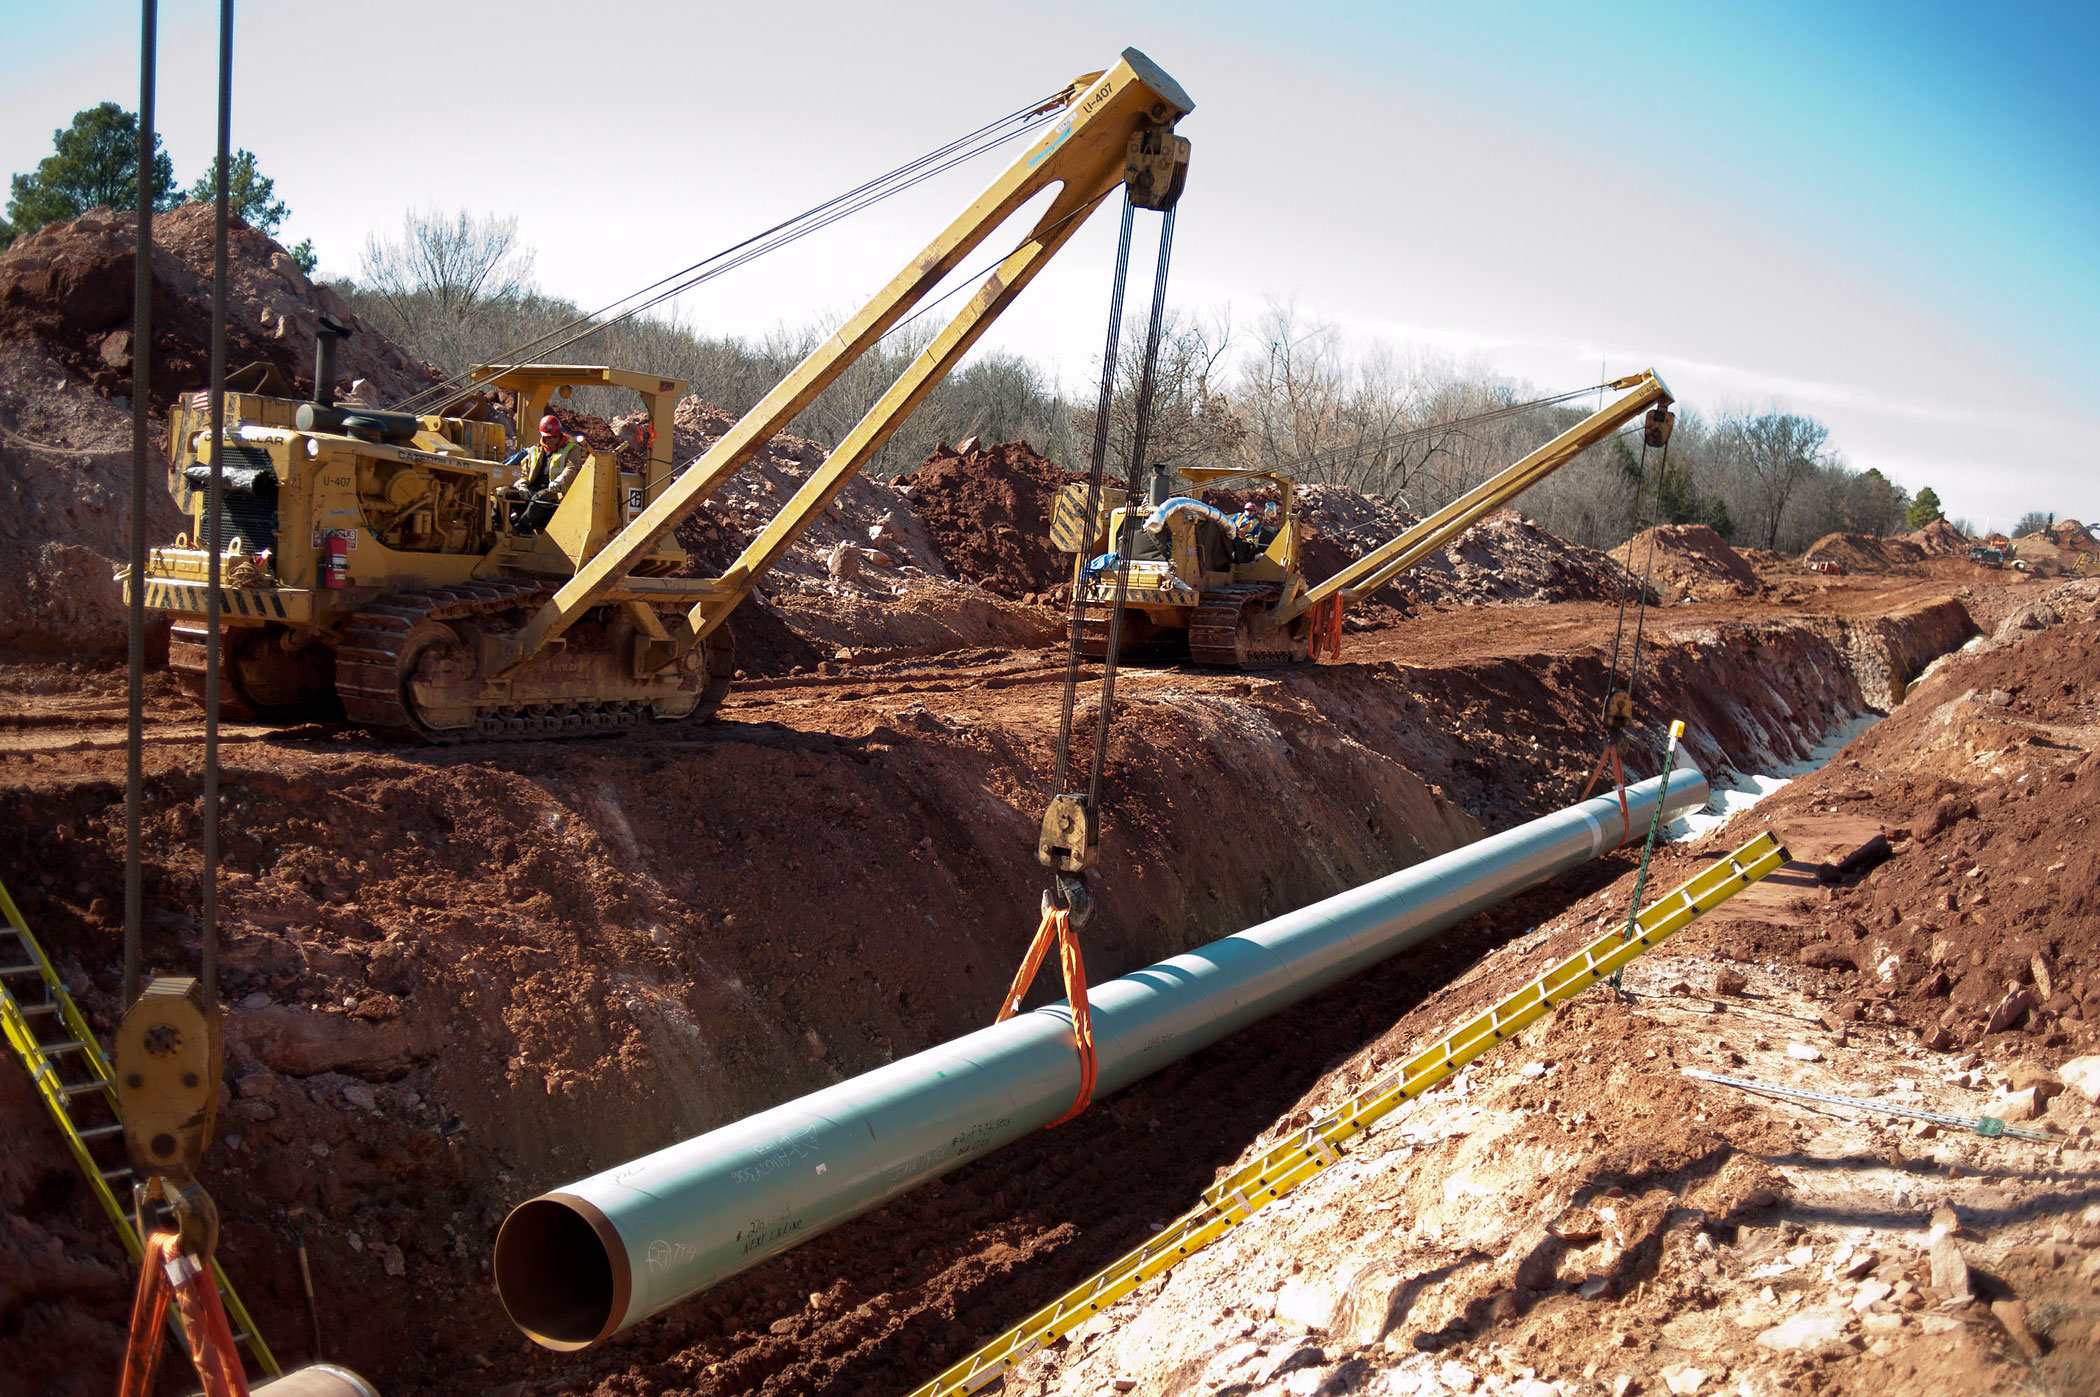 A sixty-foot section of pipe is lowered into a trench during construction of the Gulf Coast Project pipeline in Prague, Oklahoma, U.S., on March 11, 2013. (Daniel Acker—Bloomberg/Getty Images)